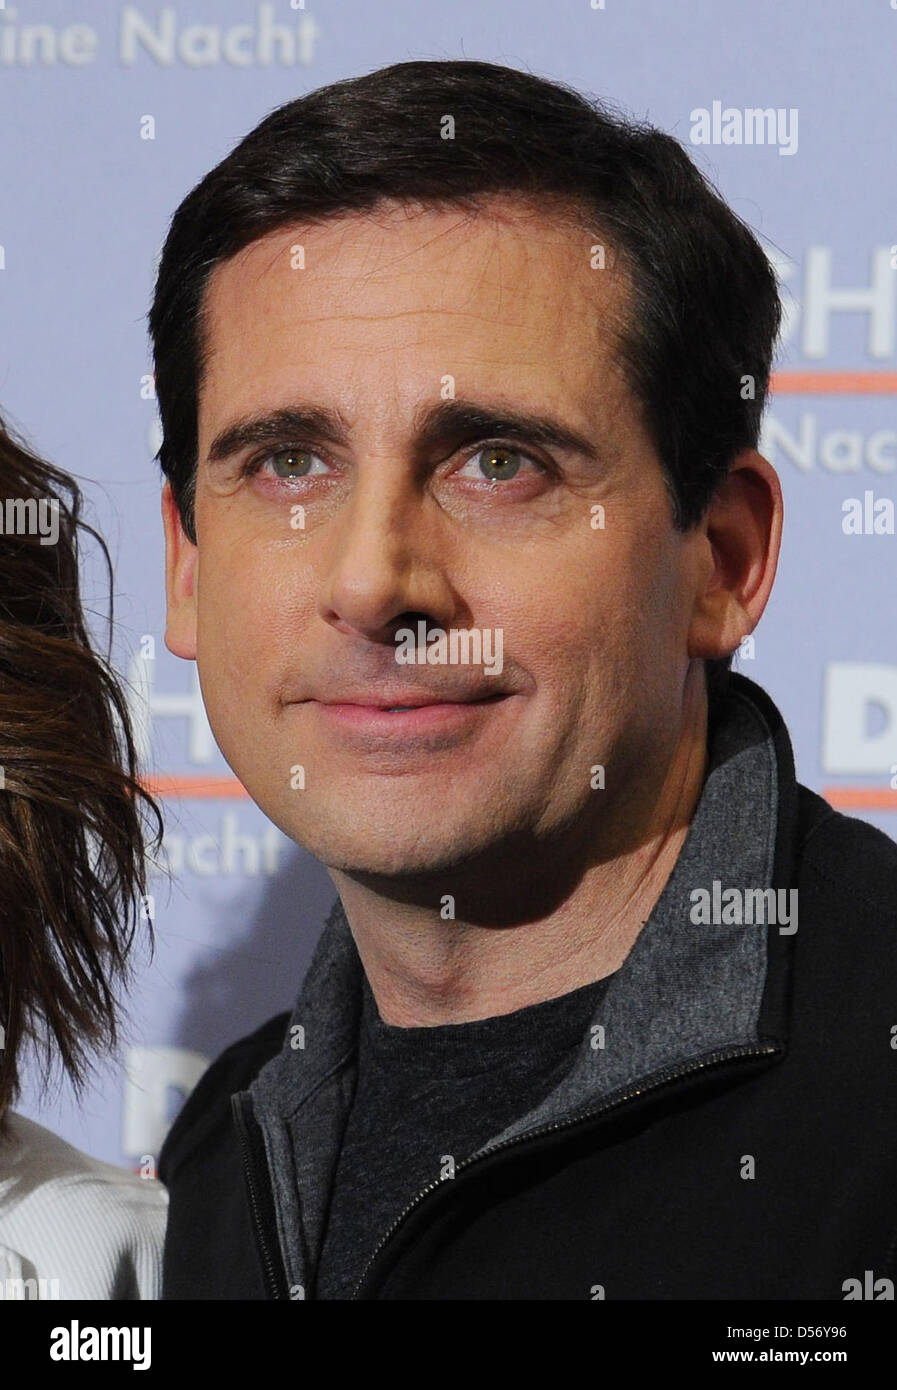 US actor Steve Carell poses during a photo call on his film 'Date